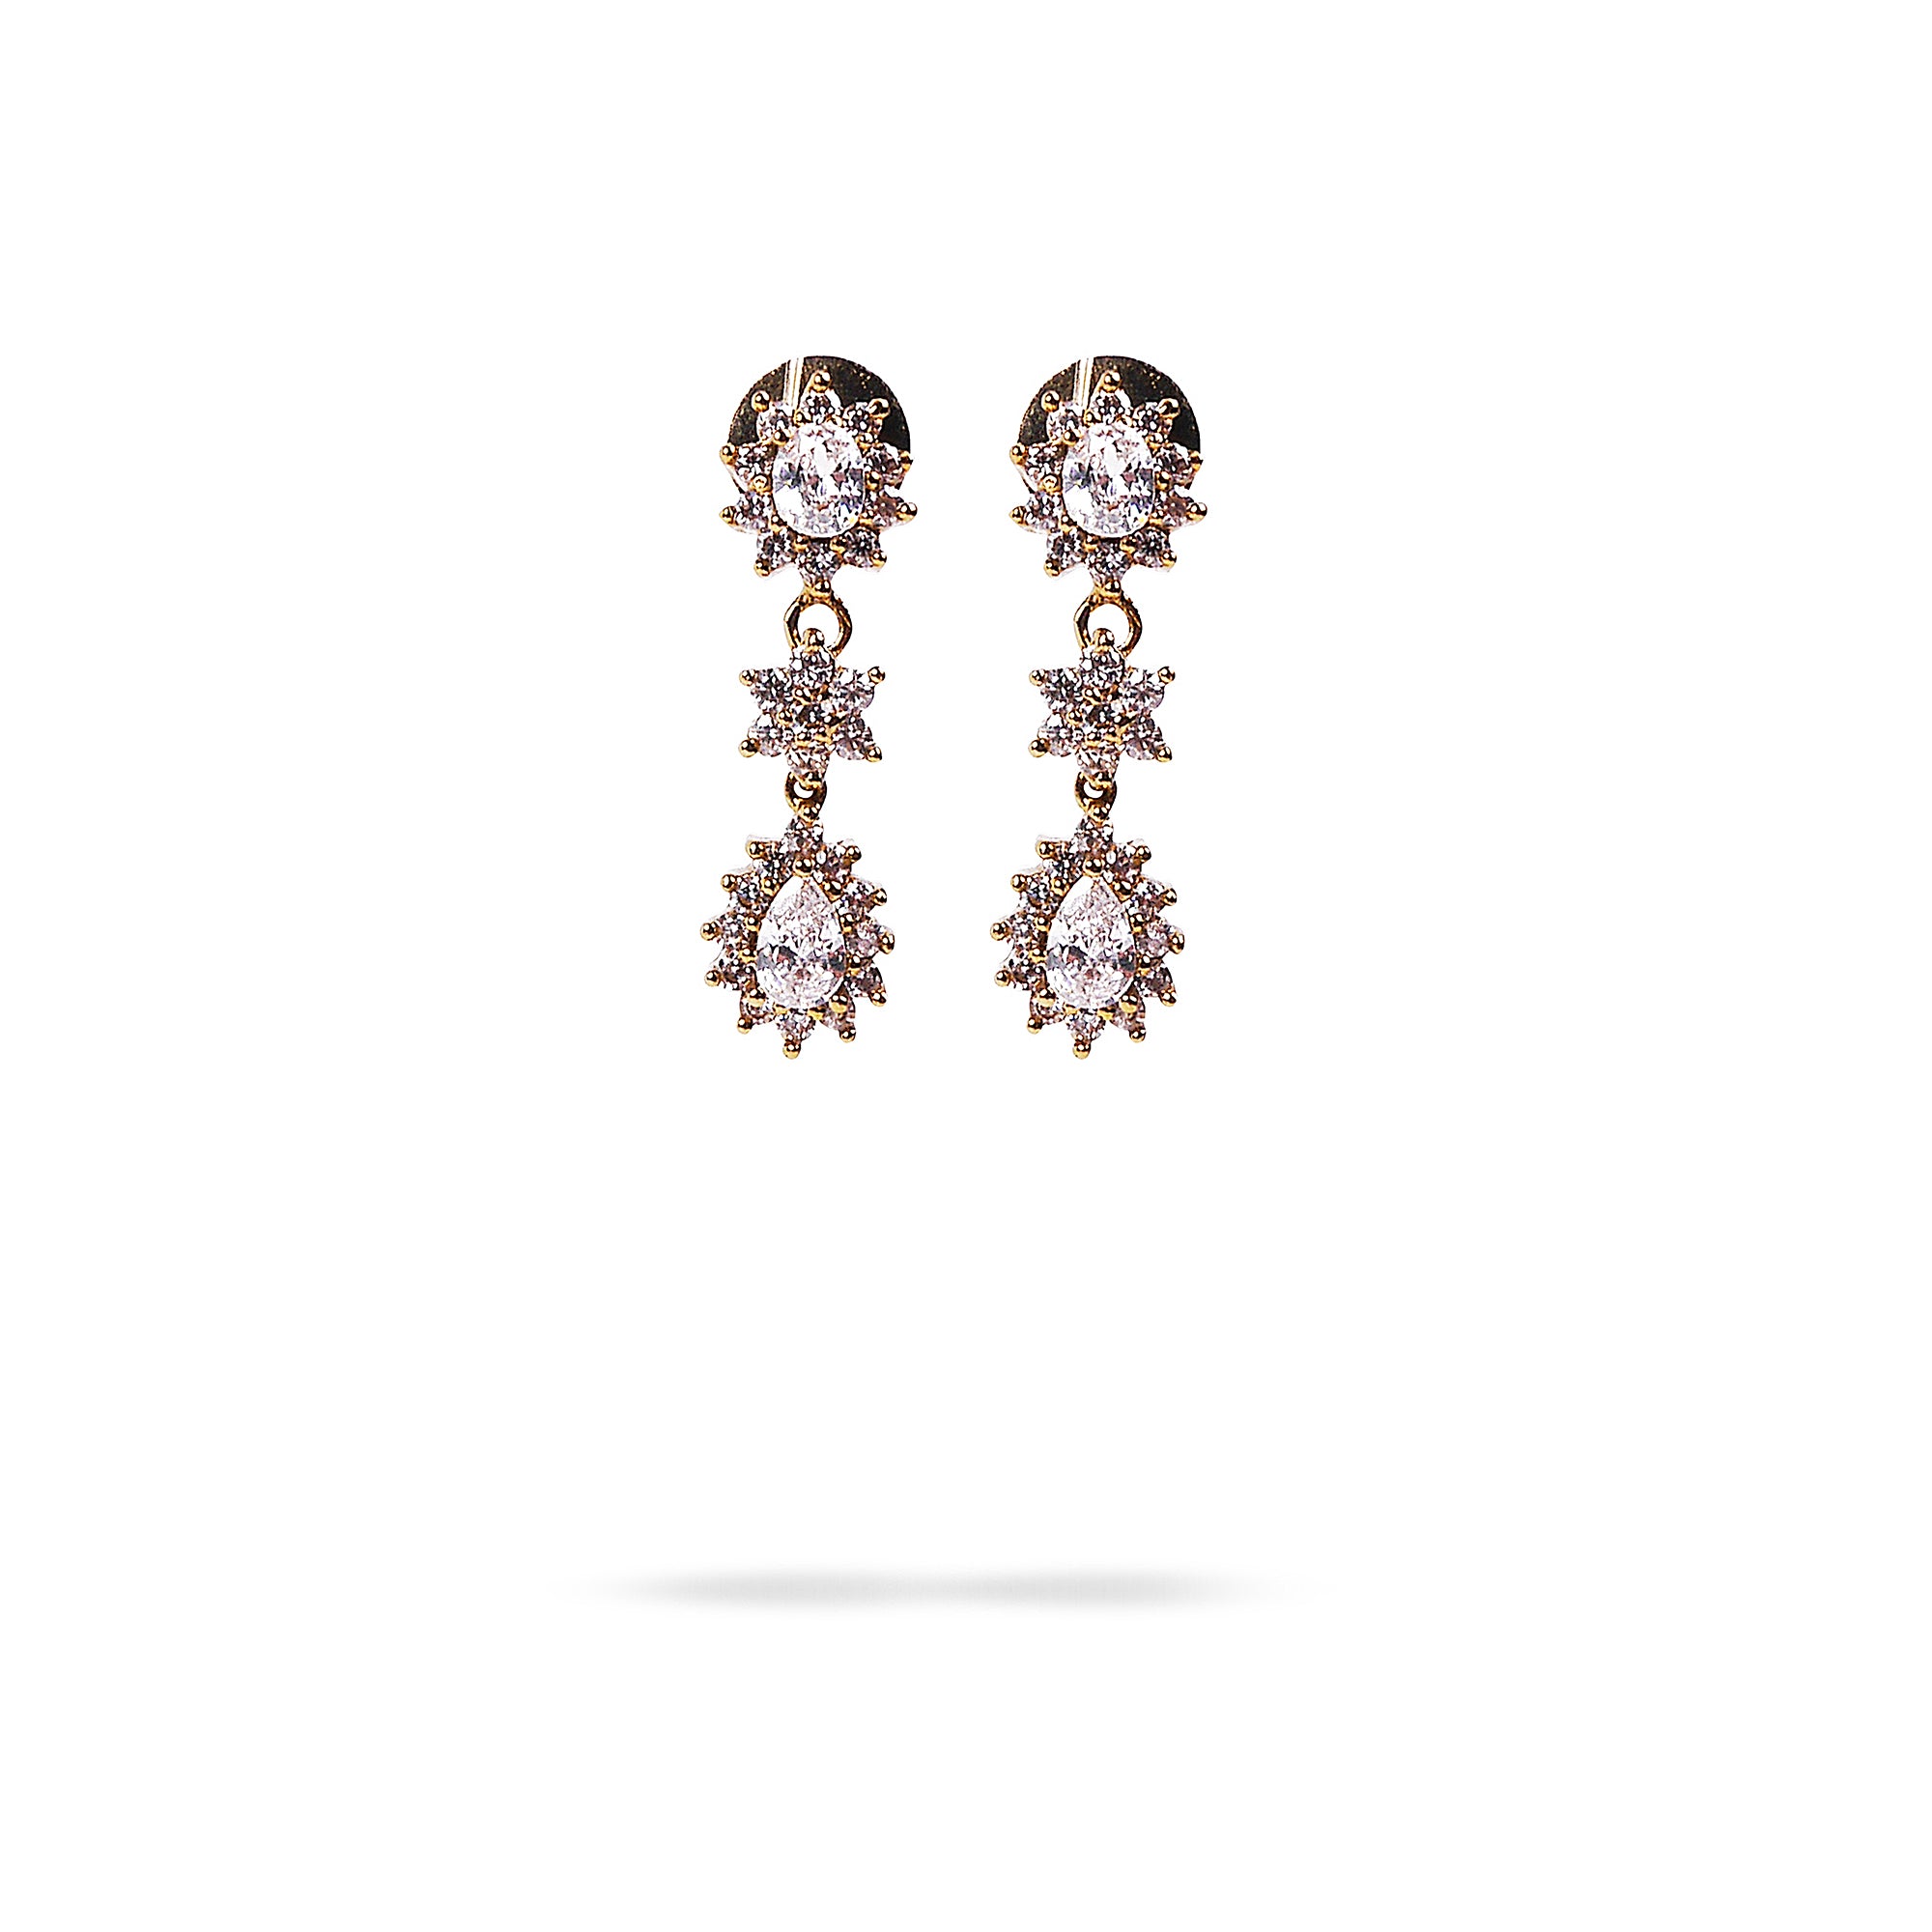 Teardrop Star Cubic Zirconia Earrings in White and Antique Gold